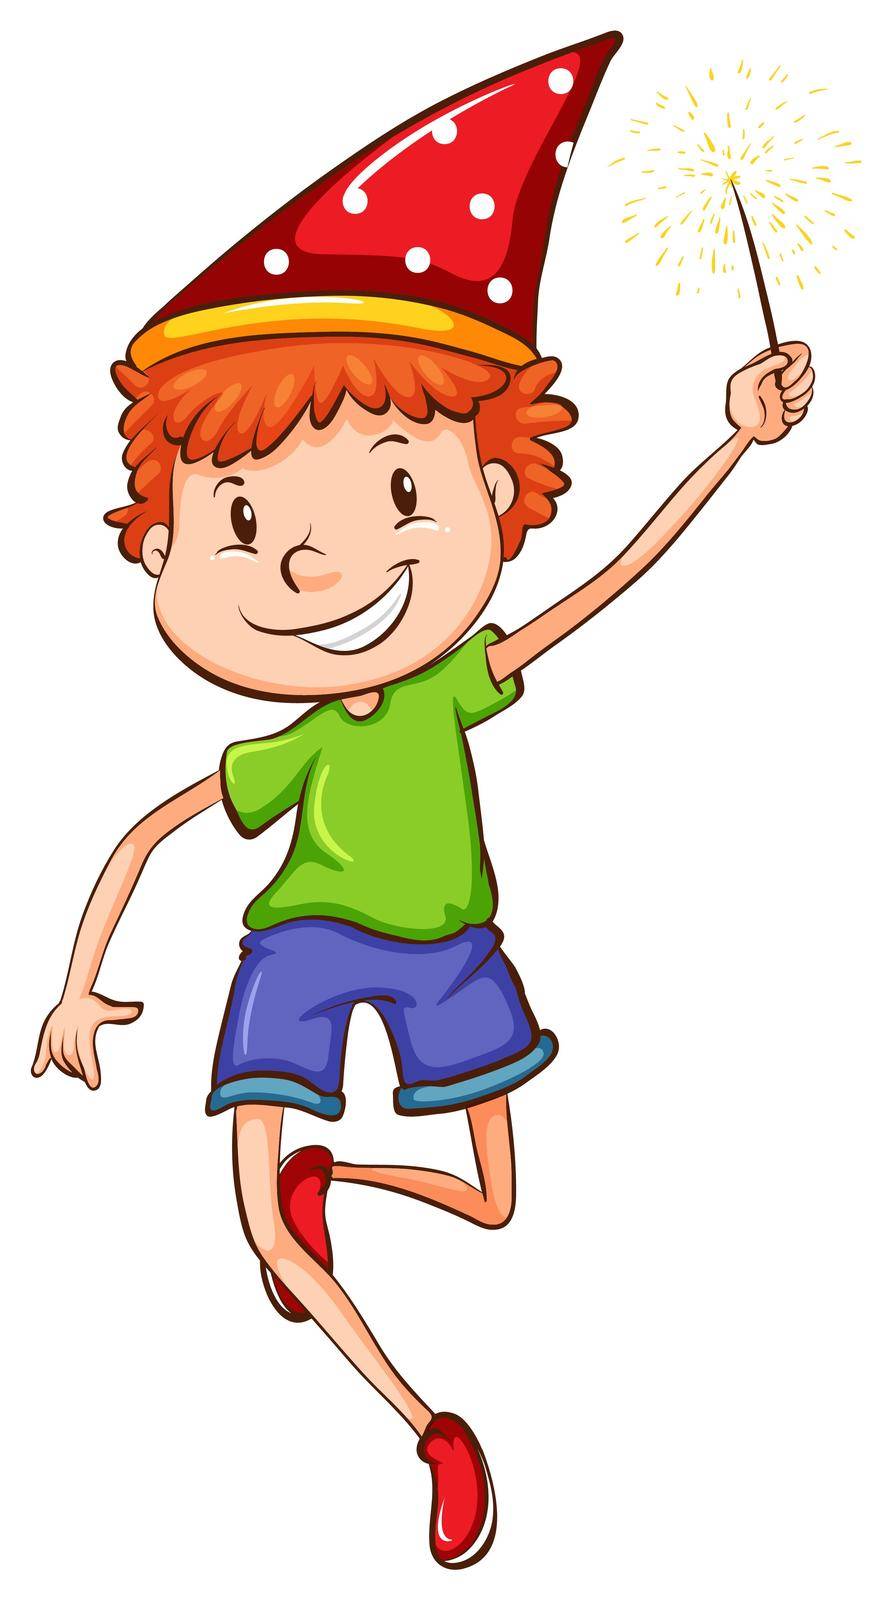 Illustration of a simple sketch of a boy celebrating on a white background